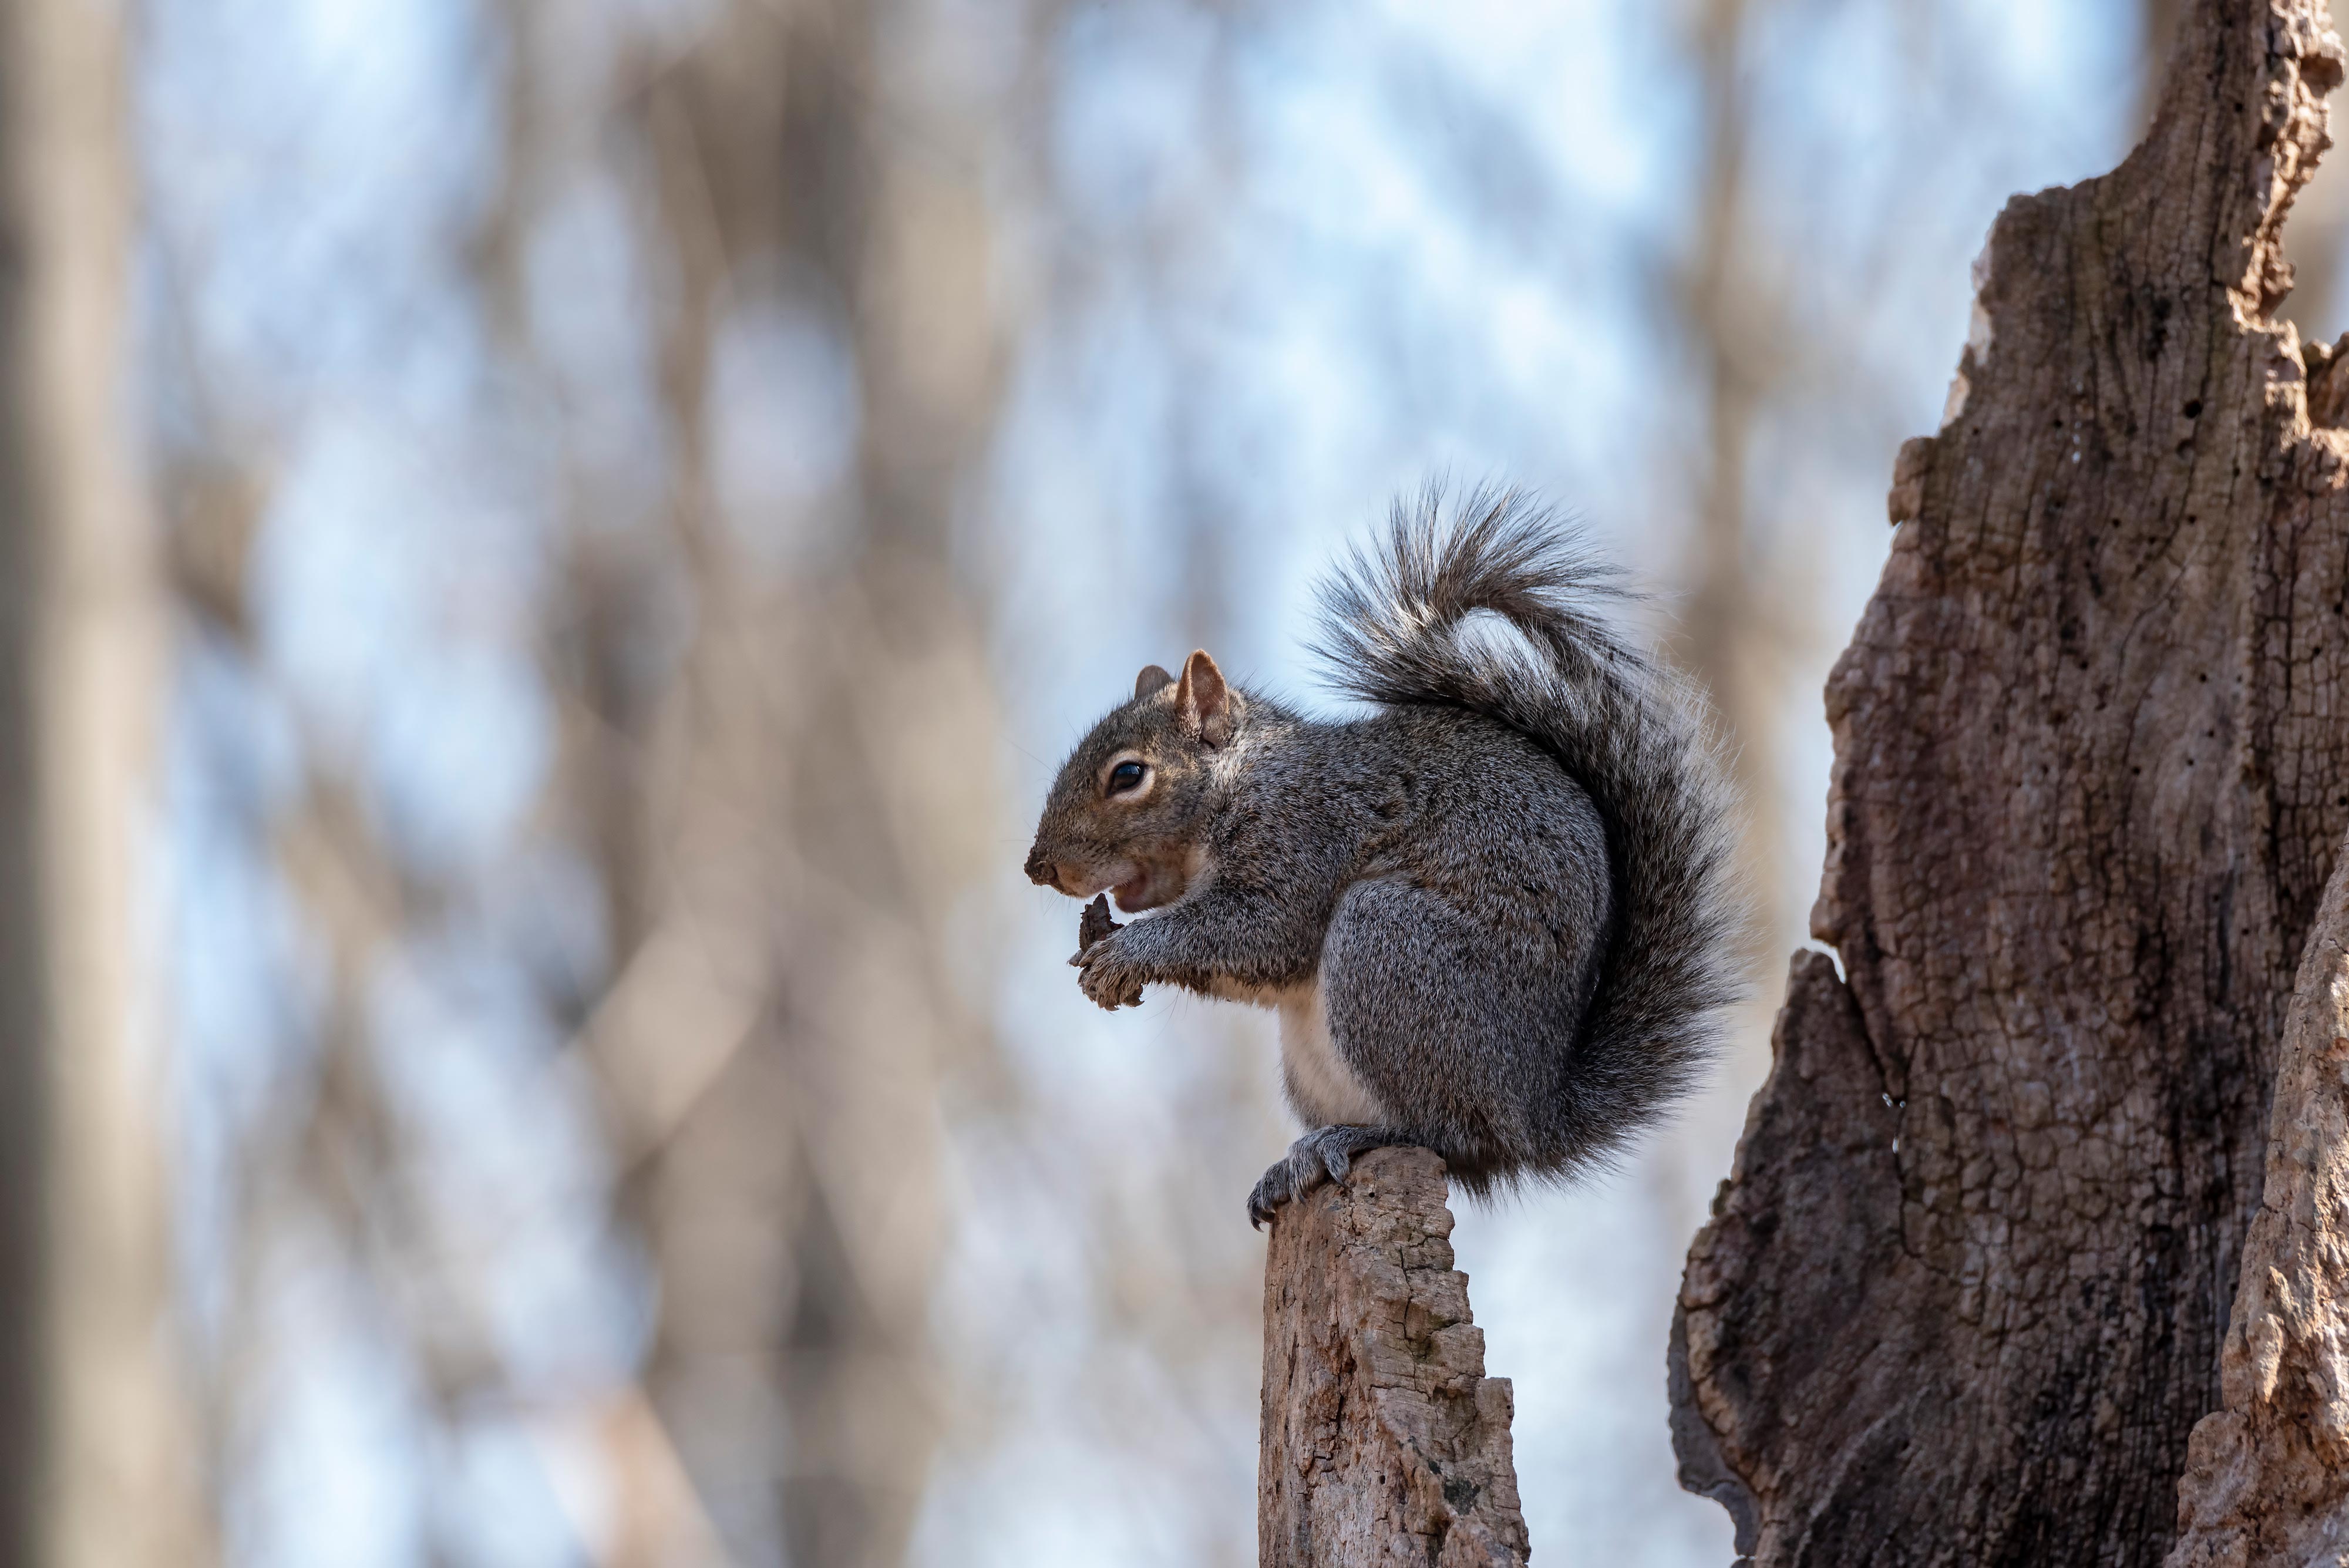 An eastern gray squirrel on a branch.